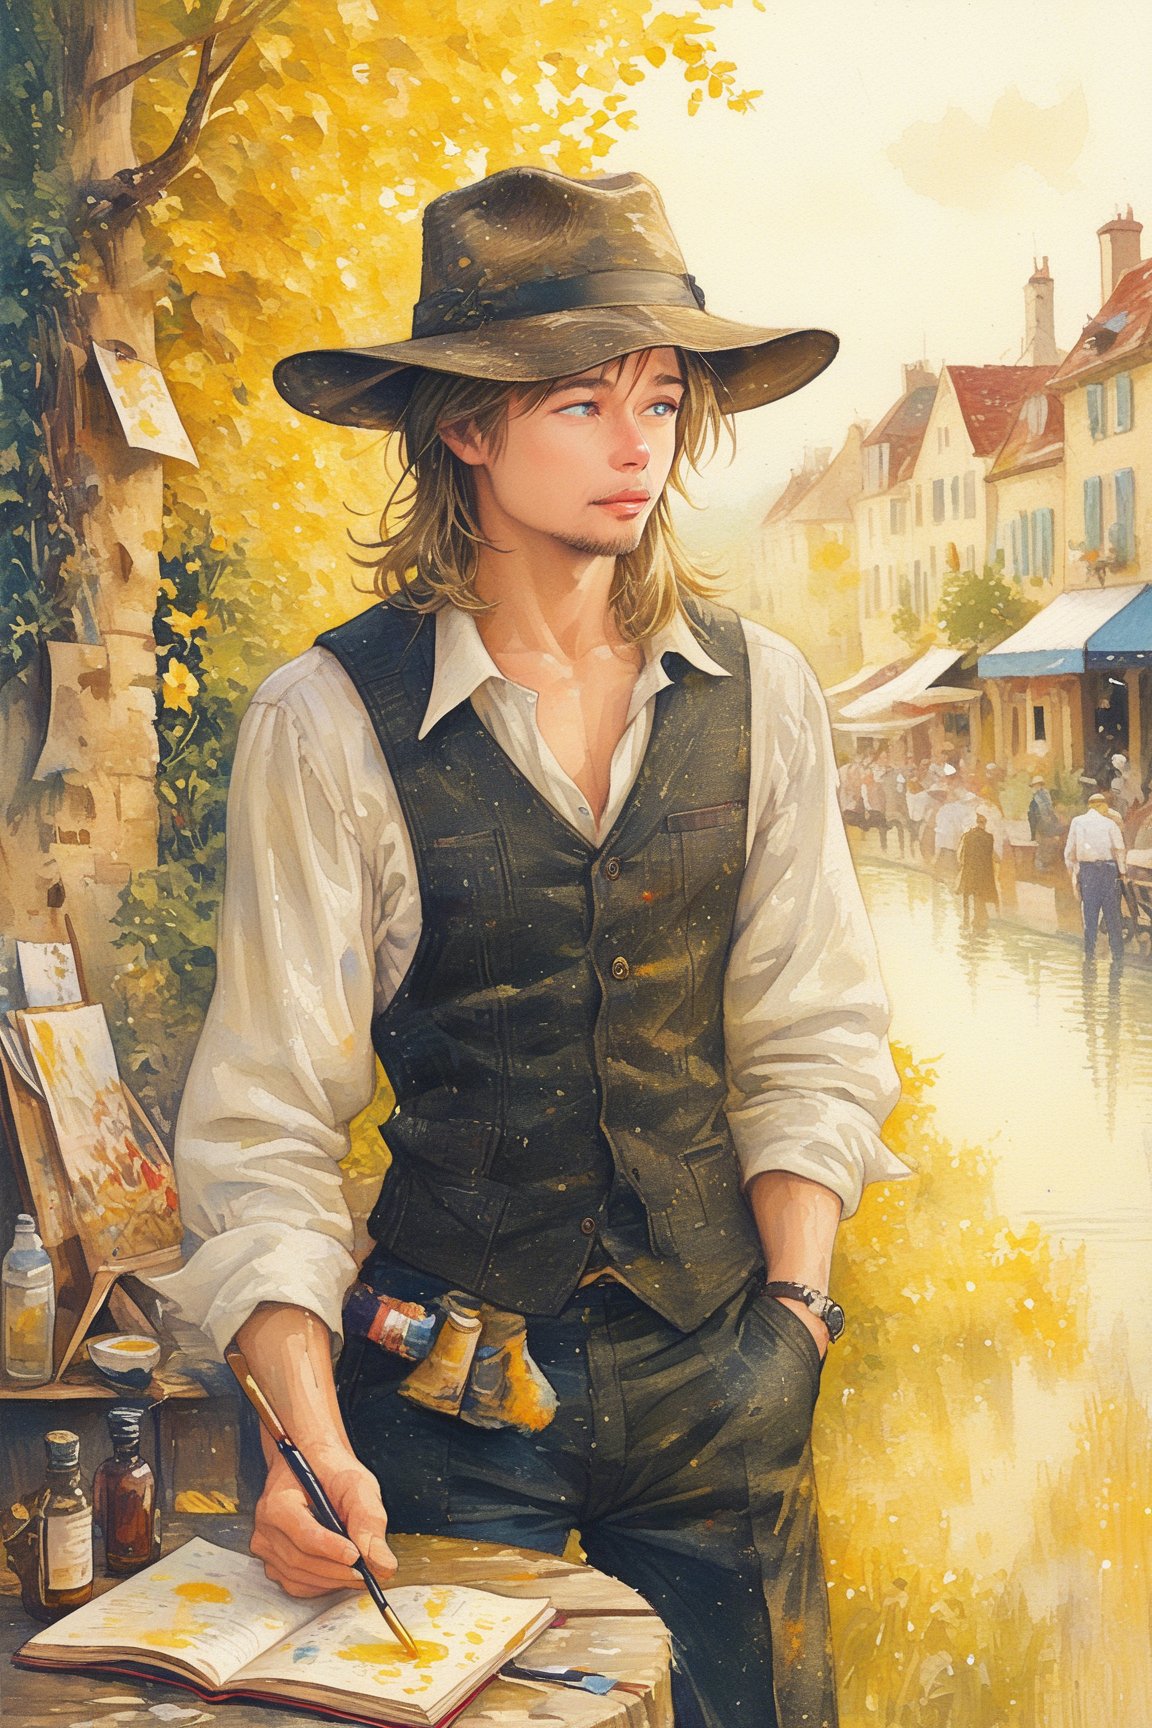 Brad Pitt exuding charisma and charm, textured oil painting, thick oil paint, brush strokes, Artrage effect,  highly detailed, sunny outdoor backdrop, dynamic lighting, super detailing, painterley effect, post impressionism, ,oil painting,comic book